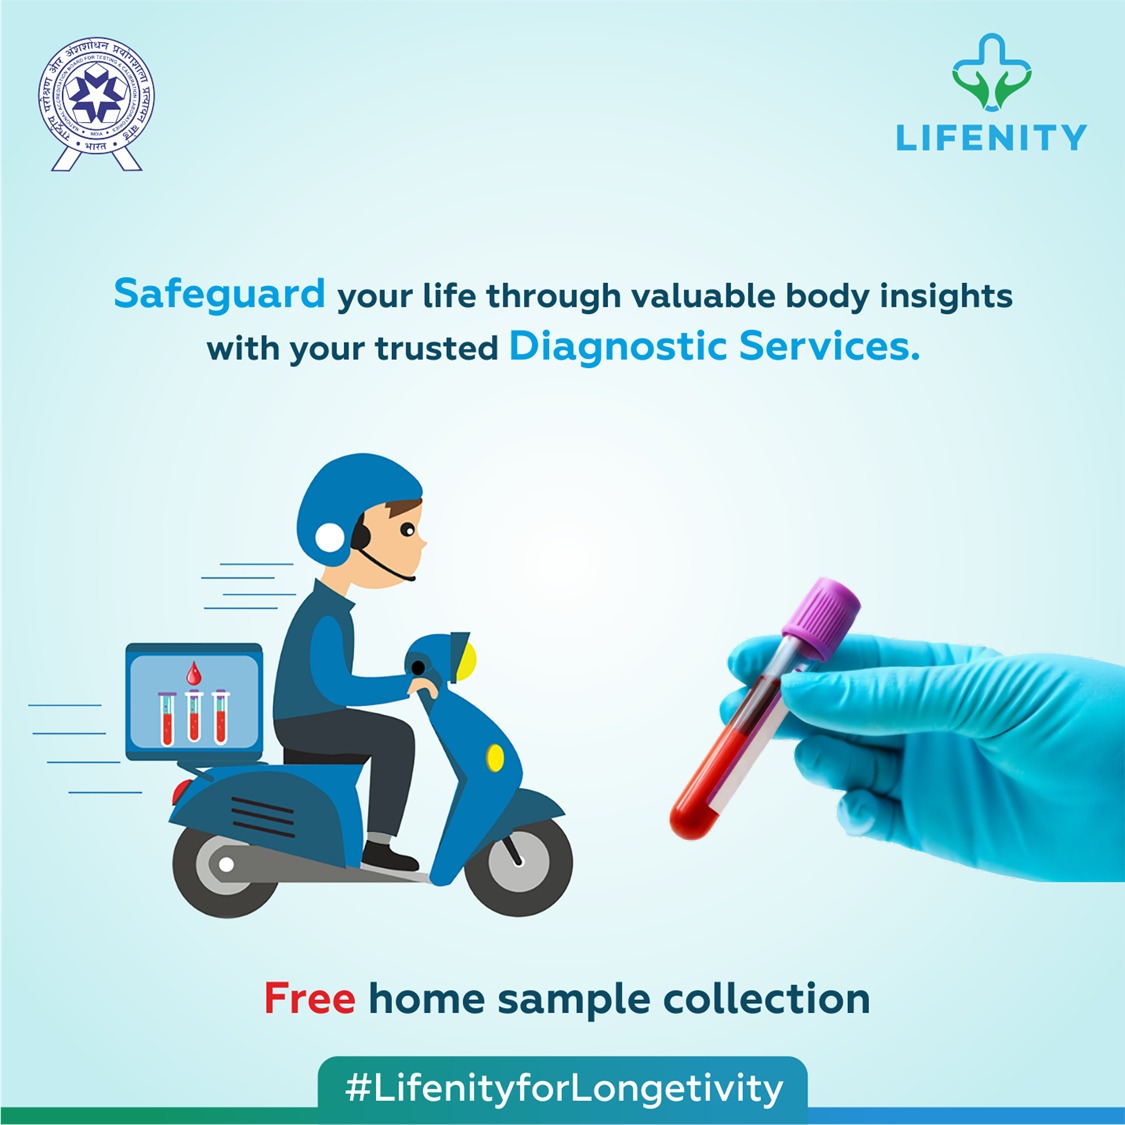 Gain valuable insights into your #Health and secure your life with #Lifenity. Protect your well-being by leveraging the power of reliable #DiagnosticServices. 
Enjoy the convenience of #FreeHomeSampleCollection, ensuring a seamless experience for your #MedicalNeeds.